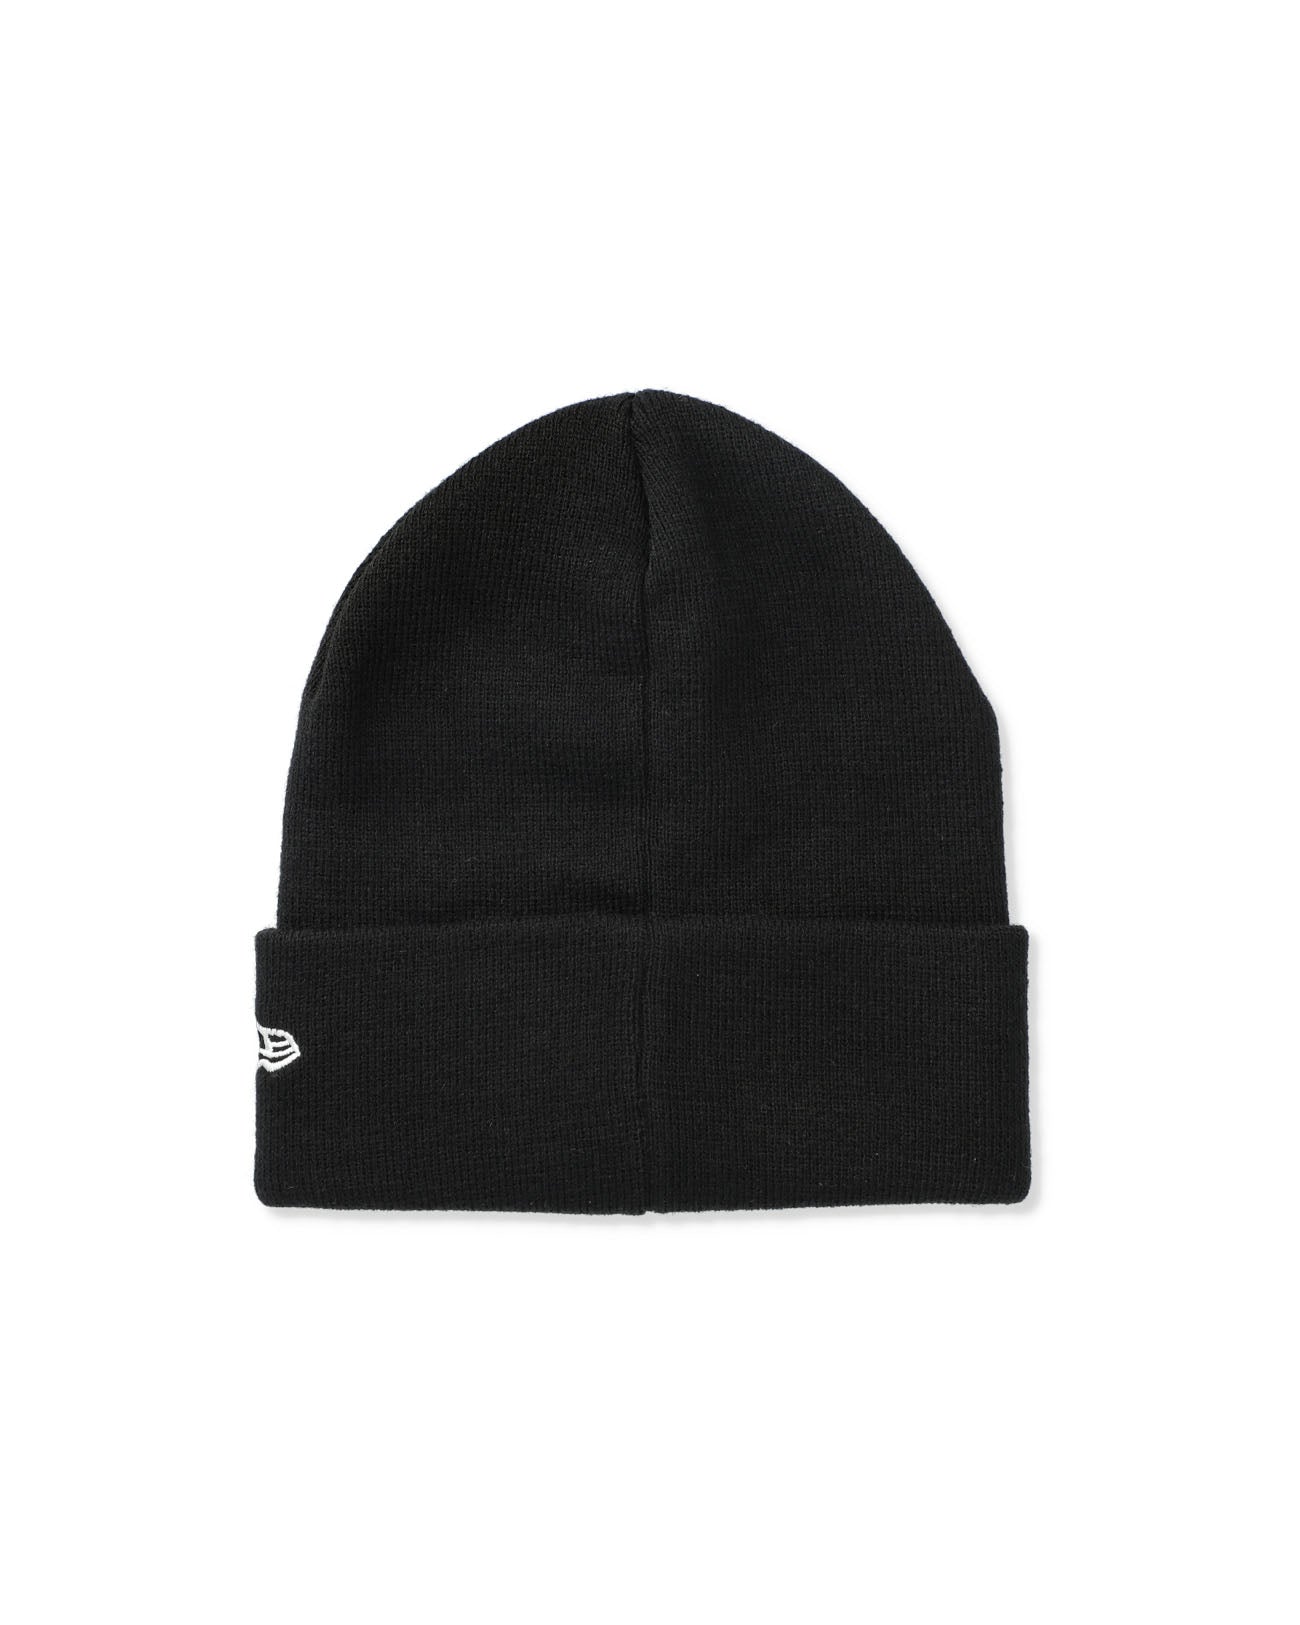 Yankees Heart Embroidery Knit Cap - black